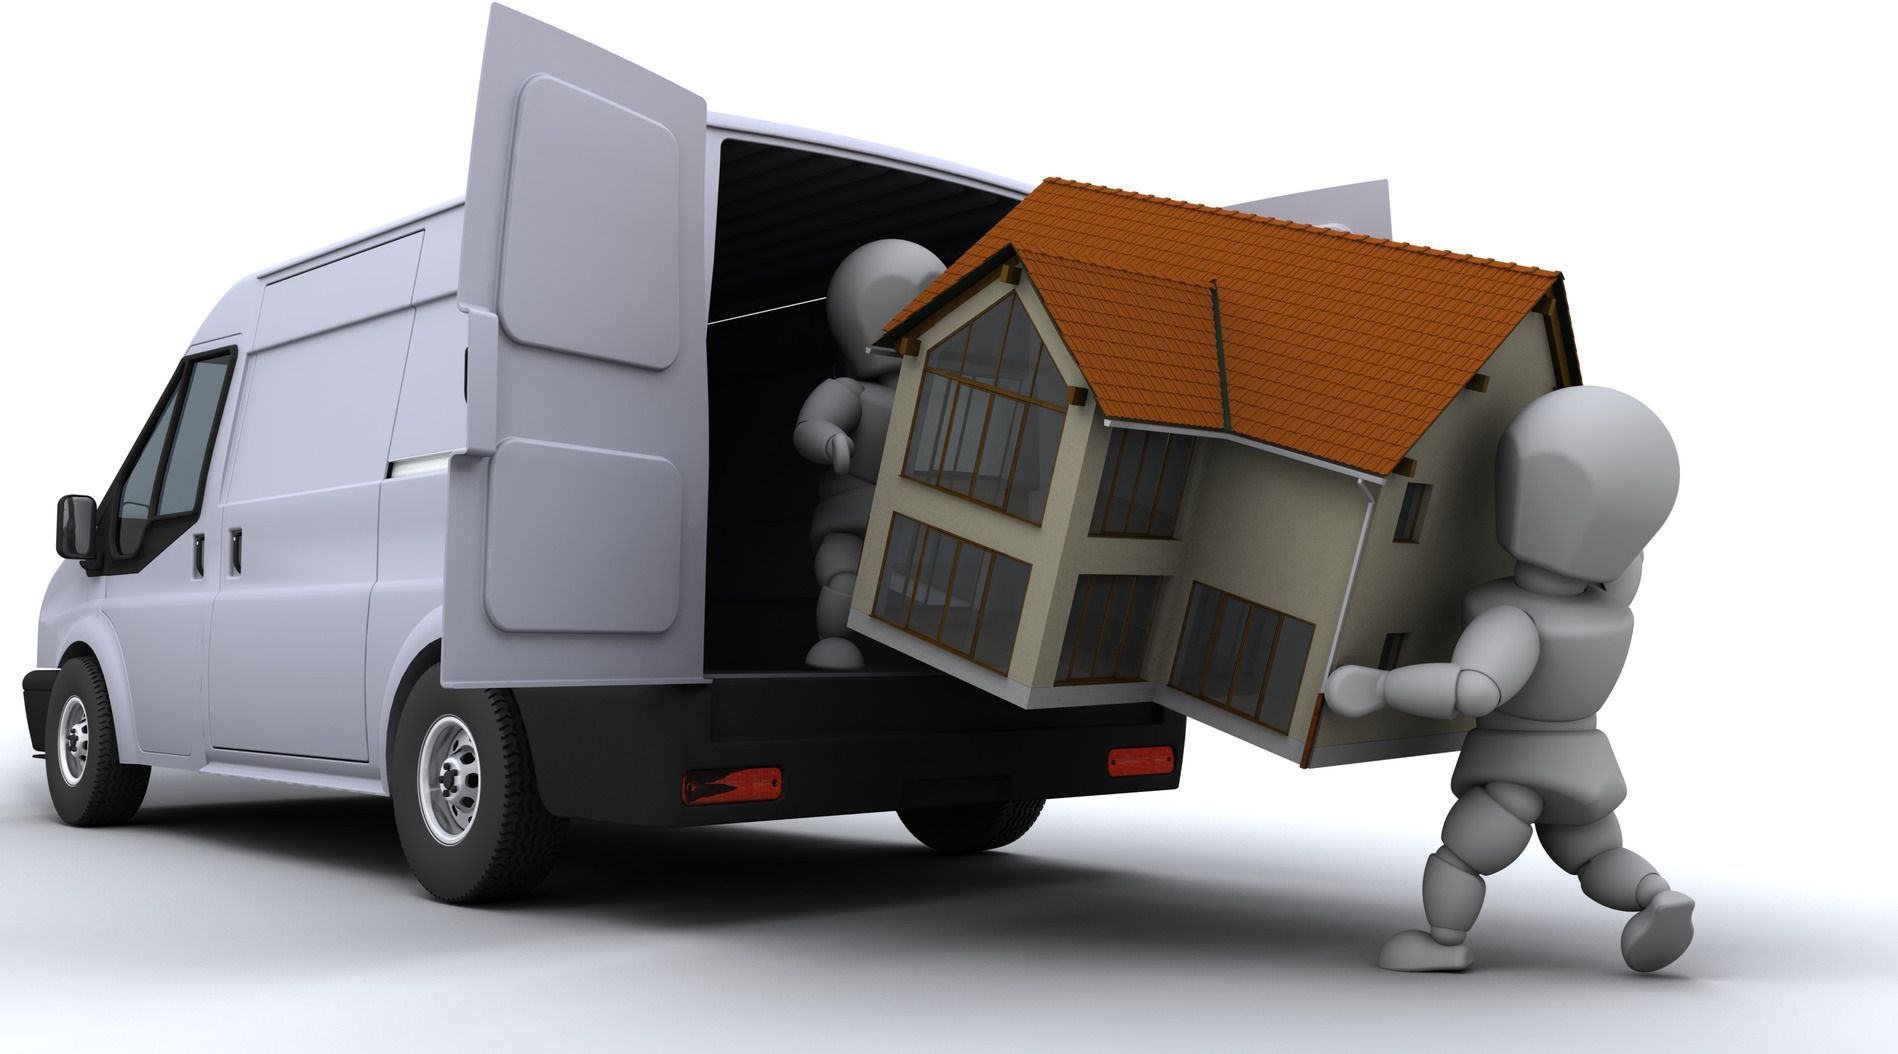 Which house removal company is best for moving?